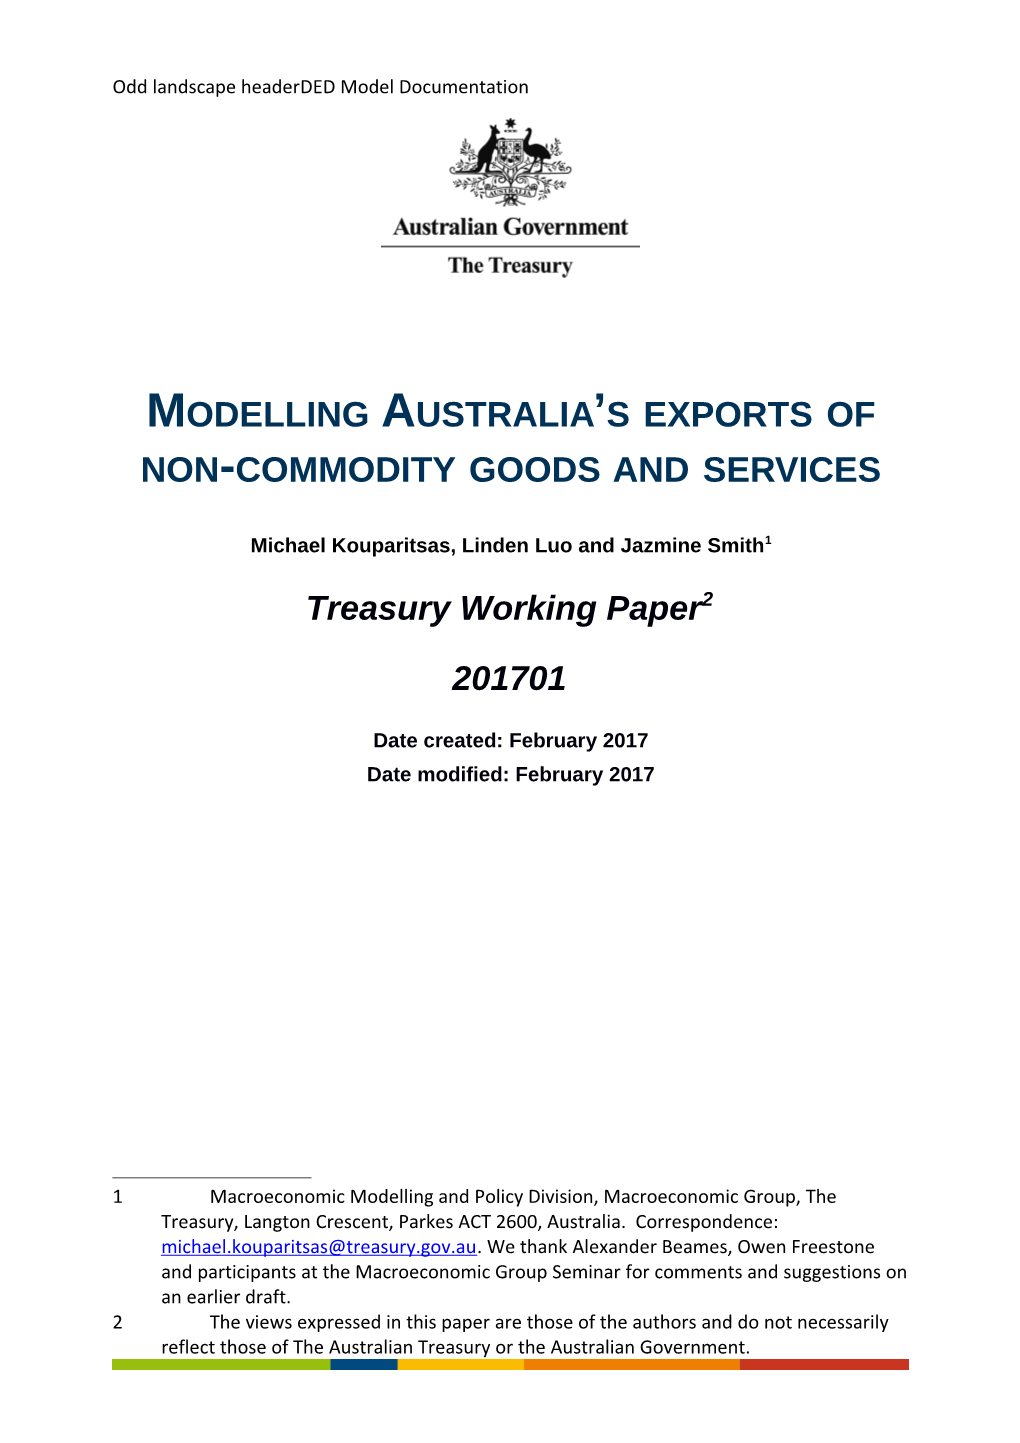 Modelling Australia S Exports of Non-Commodity Goods and Services